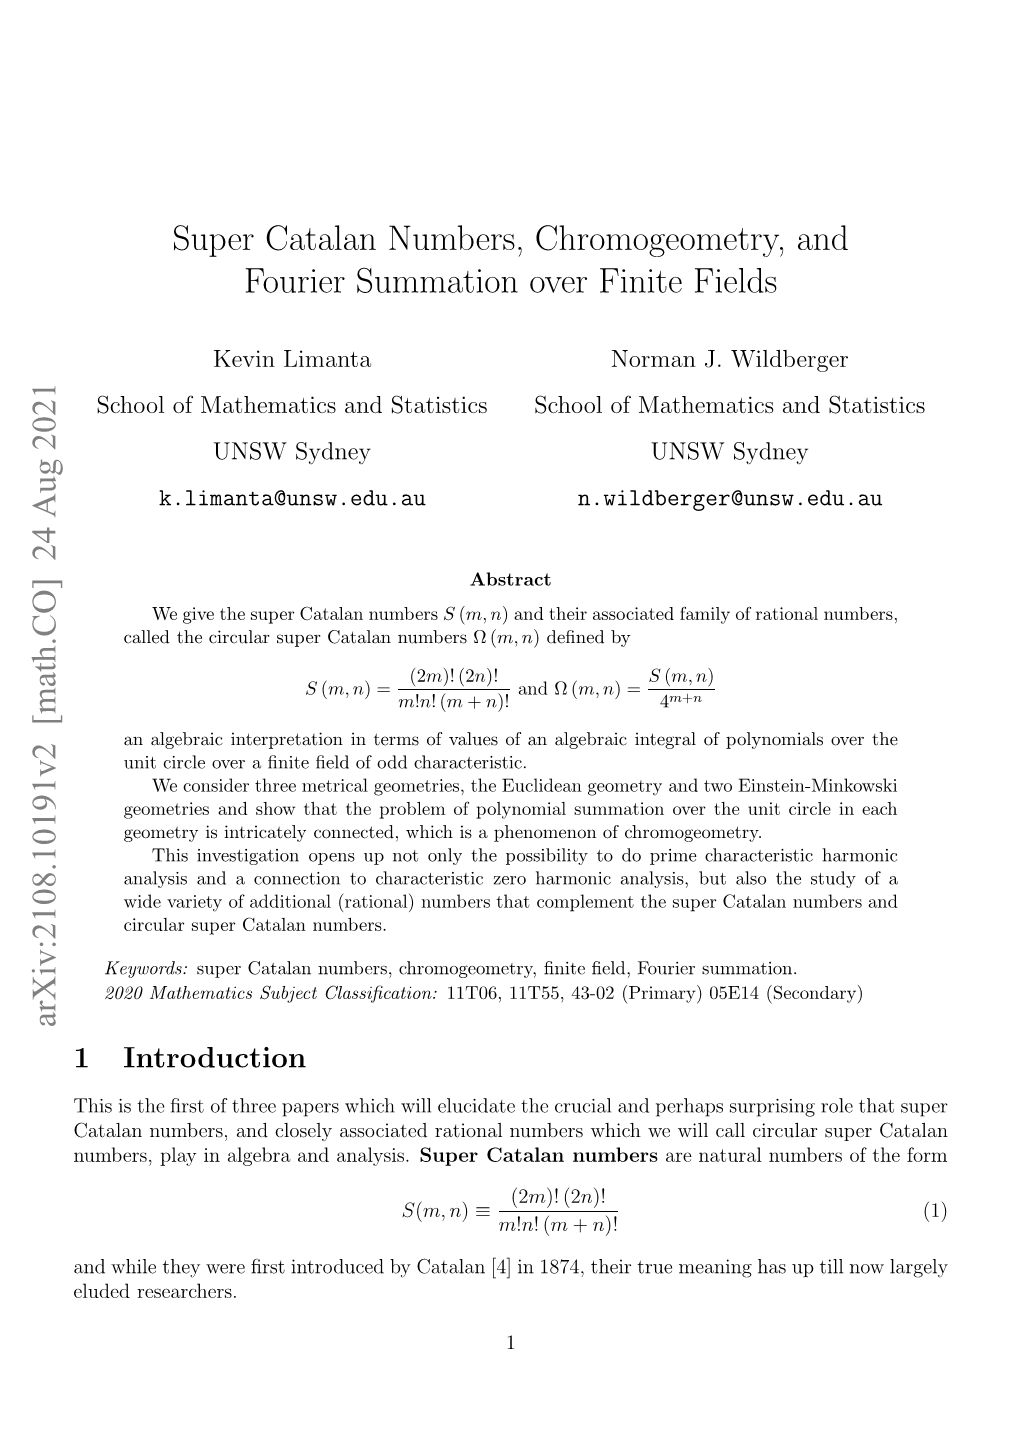 Super Catalan Numbers, Chromogeometry, and Fourier